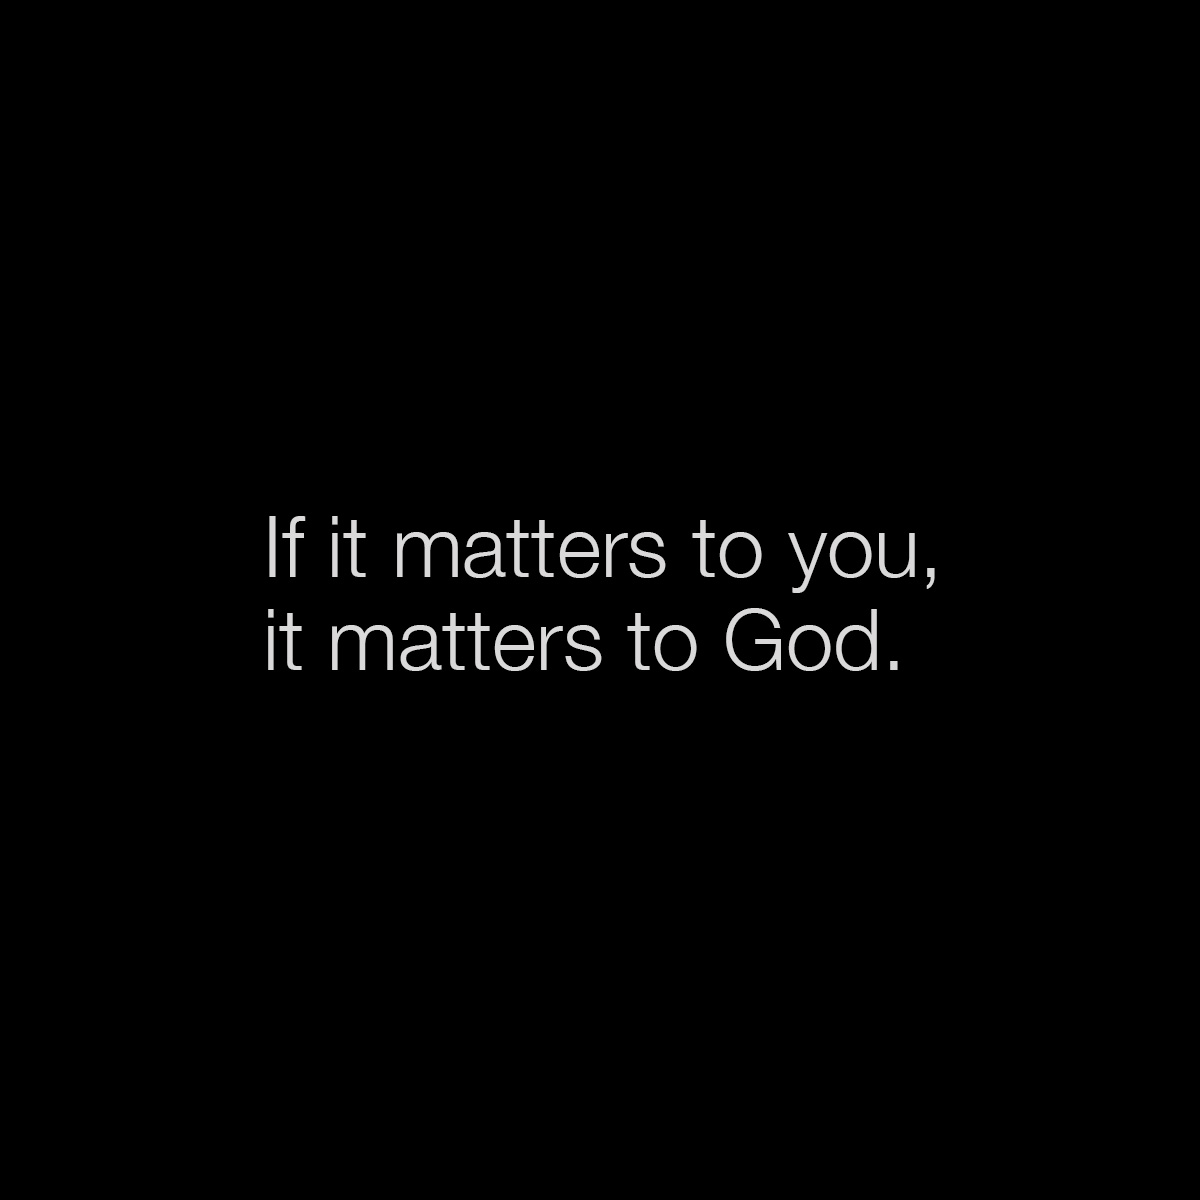 There is nothing too big for our God! “Give all your worries and cares to God, for He cares about you.” 1 Peter 5:7